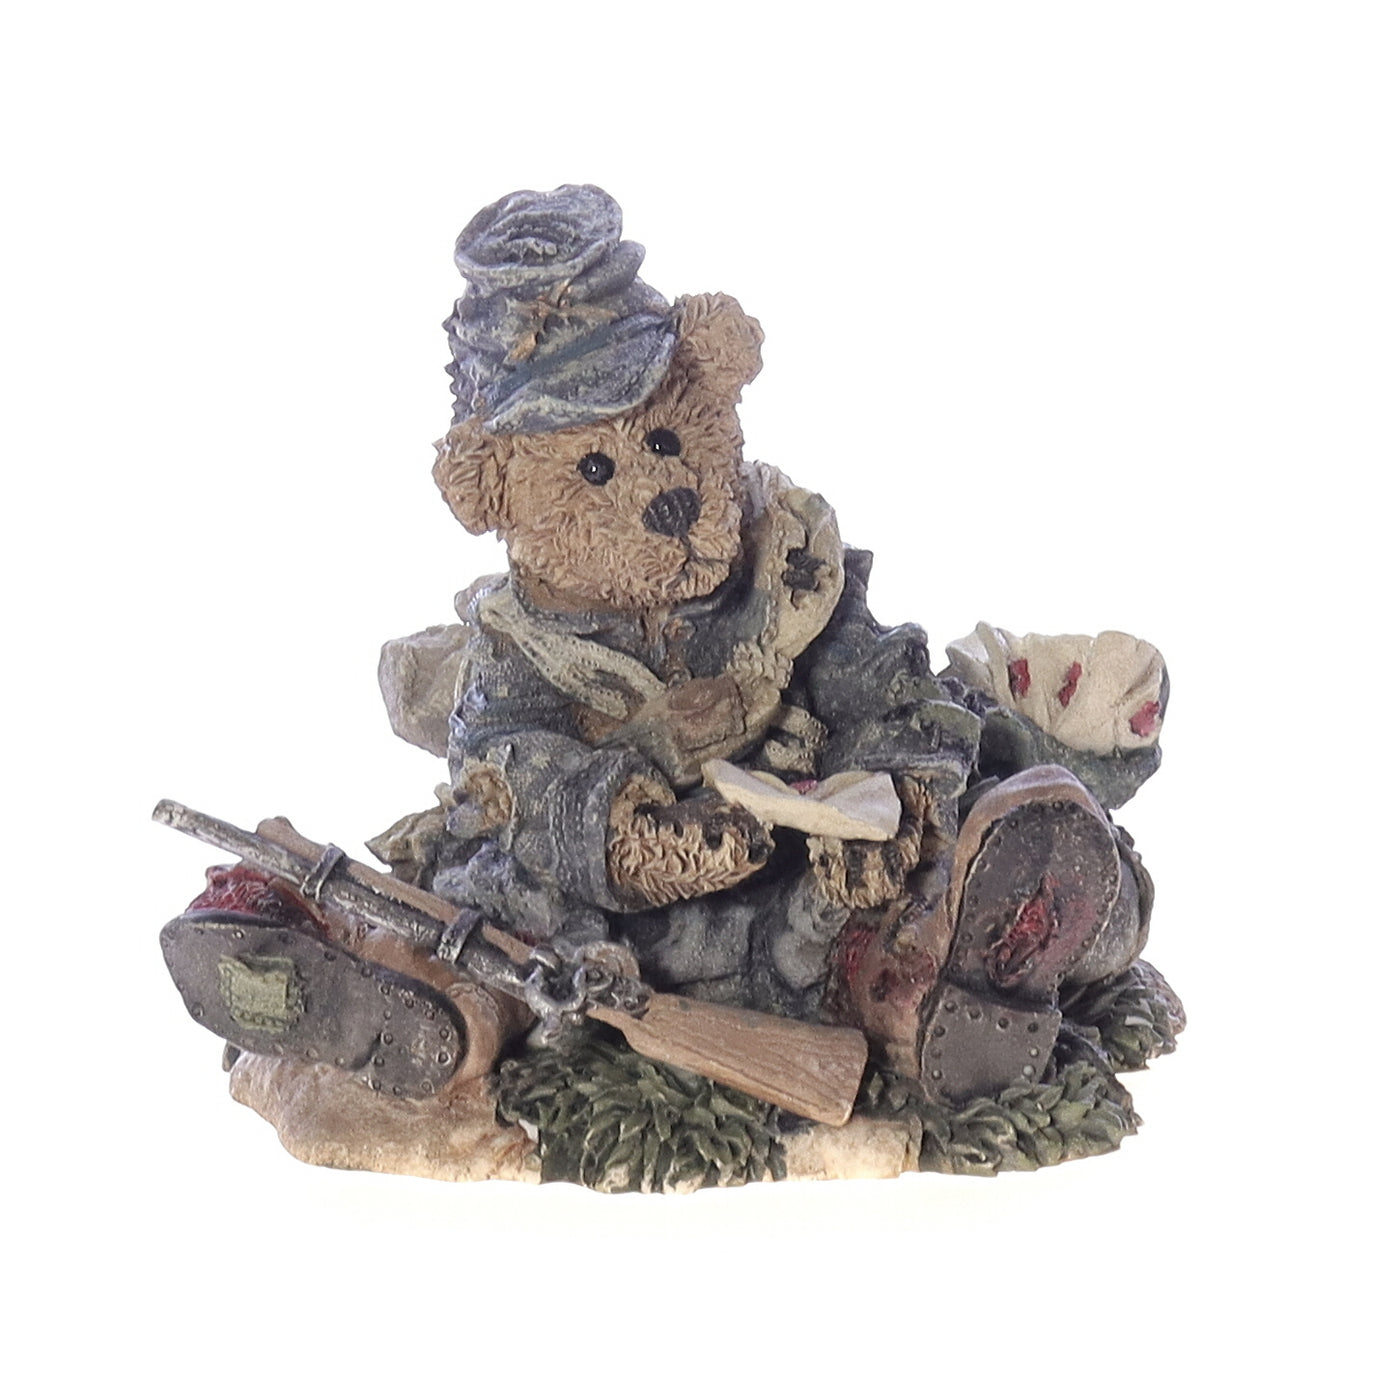 The_Bearstone_Collection_2263_Union_Jack_Love_Letters_Civil_War_Figurine_1995 Front View